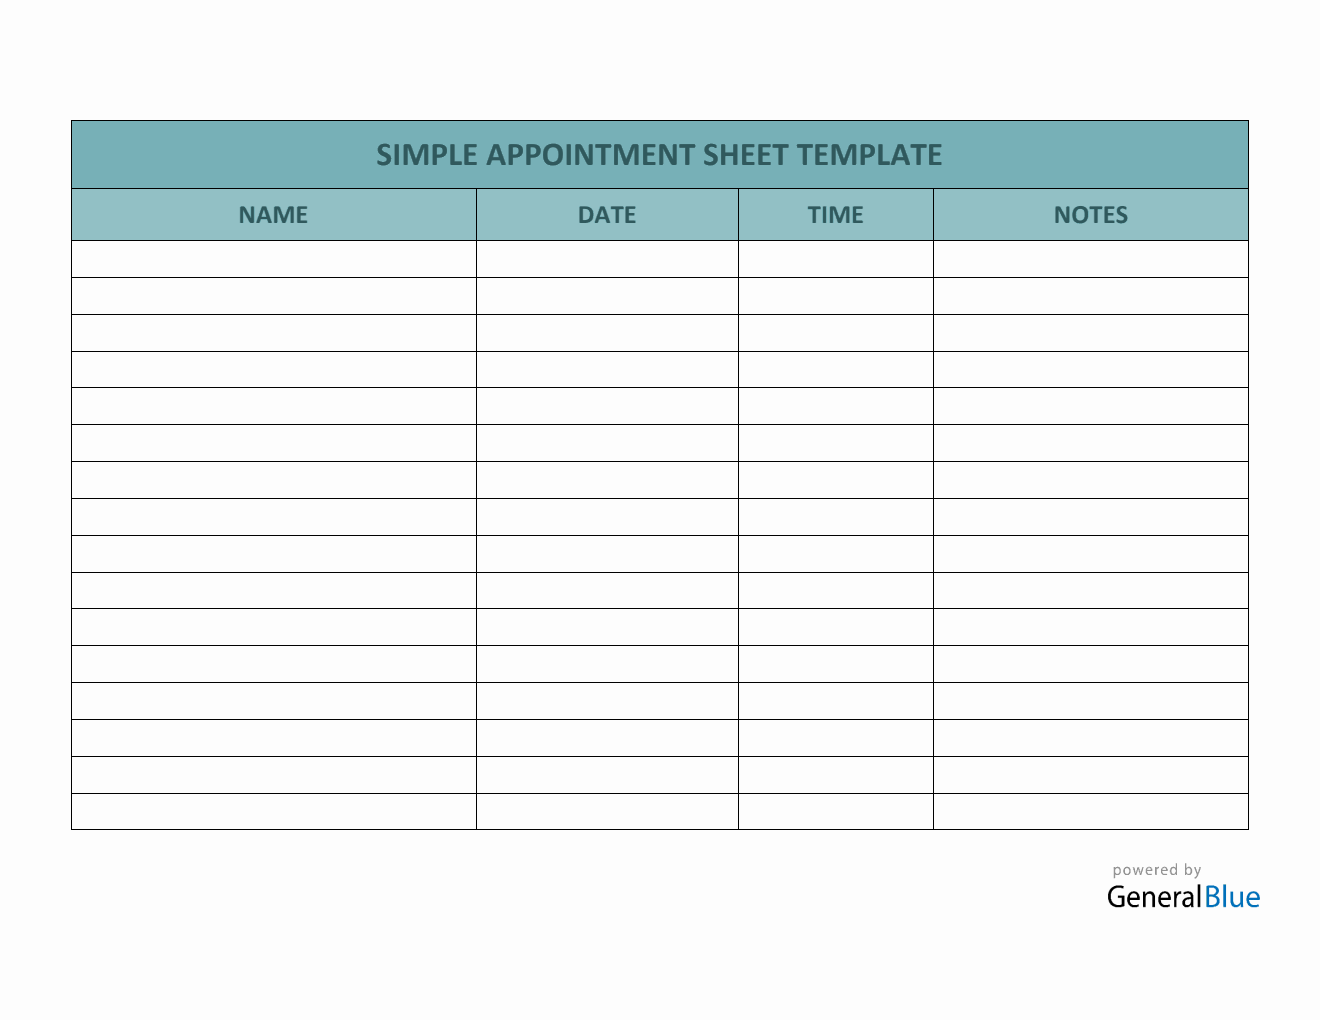 Simple Appointment Sheet Template in Word (Basic)